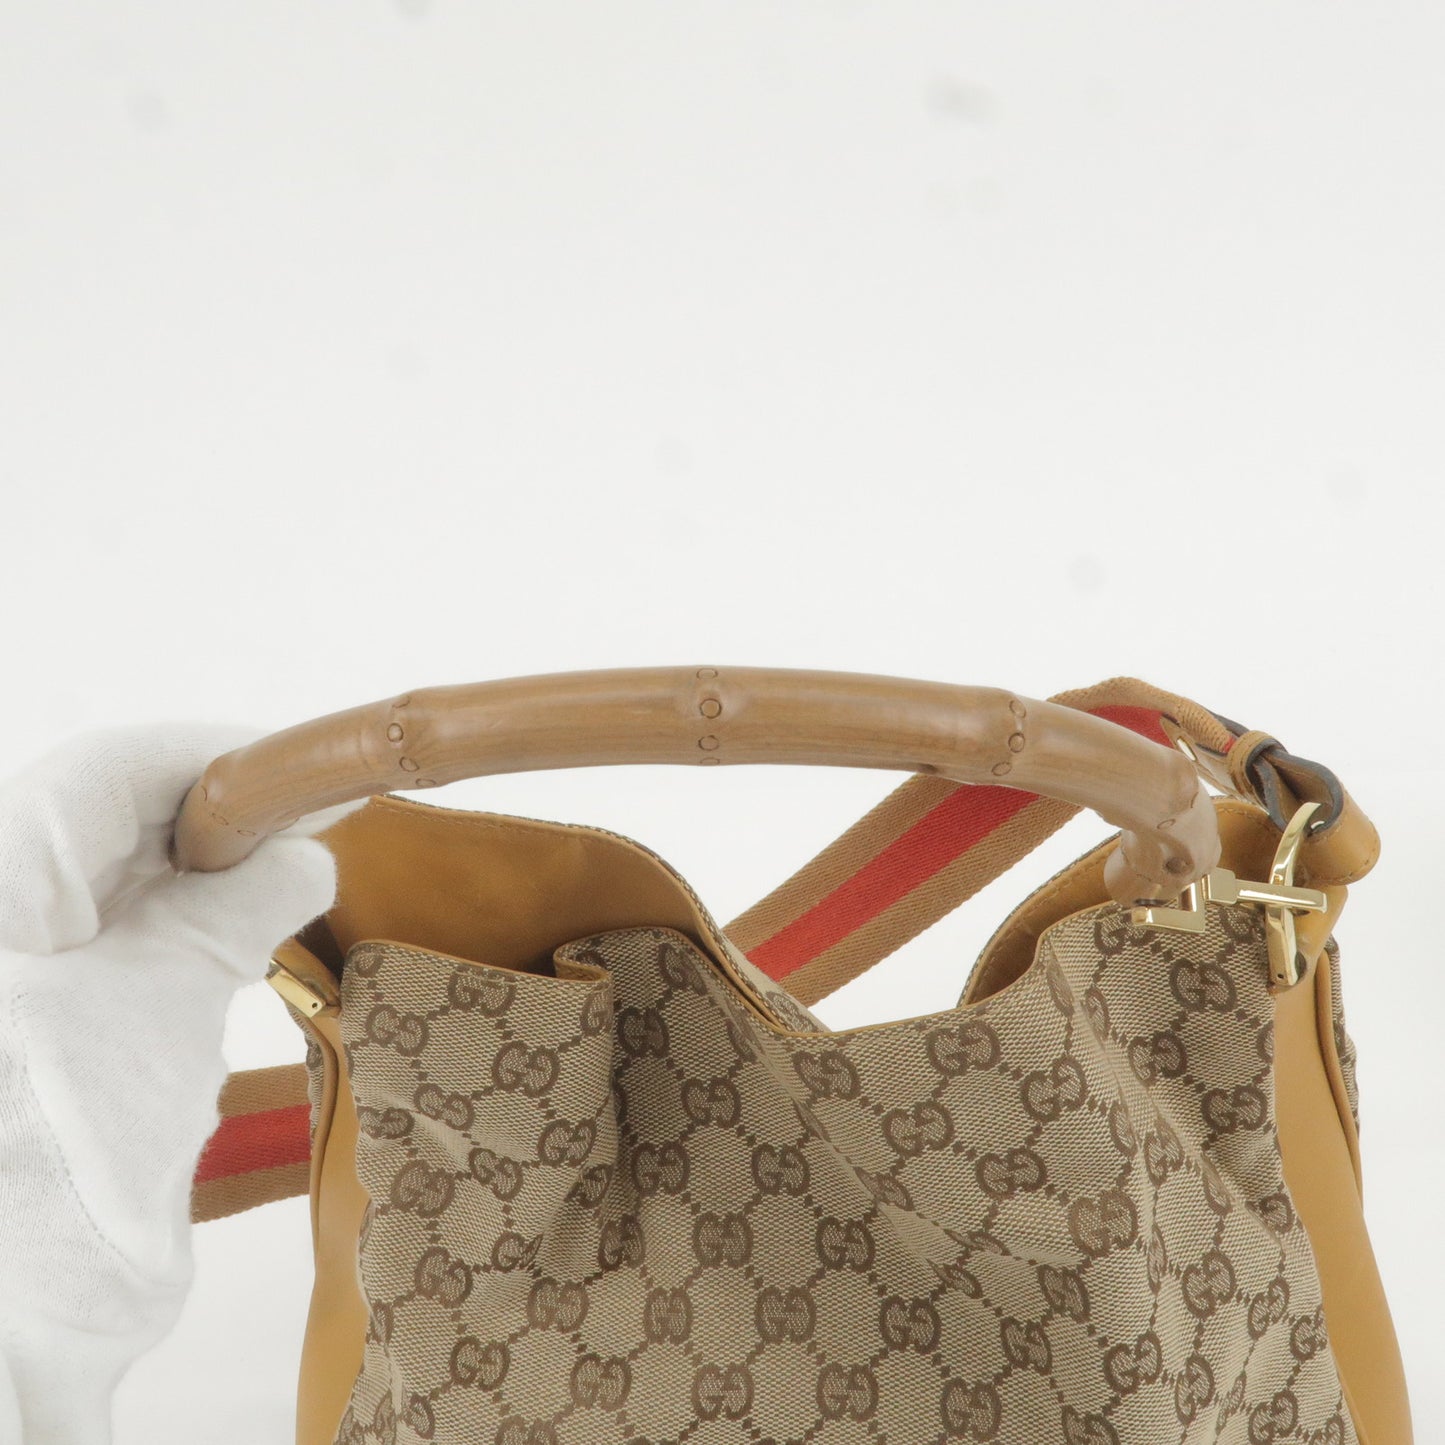 GUCCI Bamboo GG Canvas Leather 2Way Shoulder Bag 001.4095